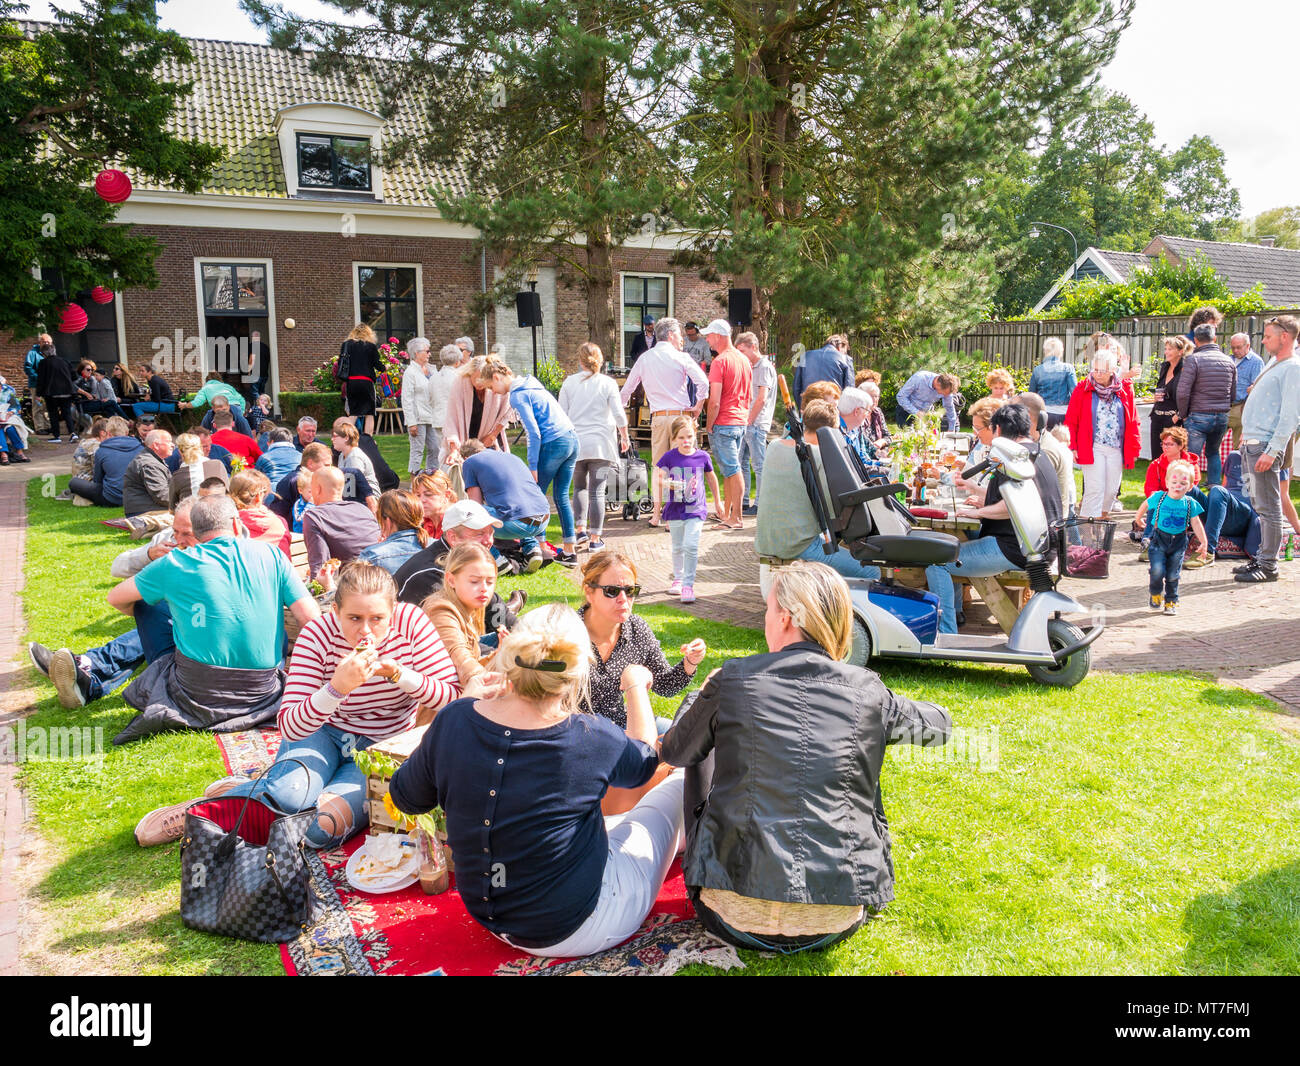 People enjoying snacks and drinks on street food festival in garden of old orphanage in historic town of Bolsward, Friesland, Netherlands Stock Photo